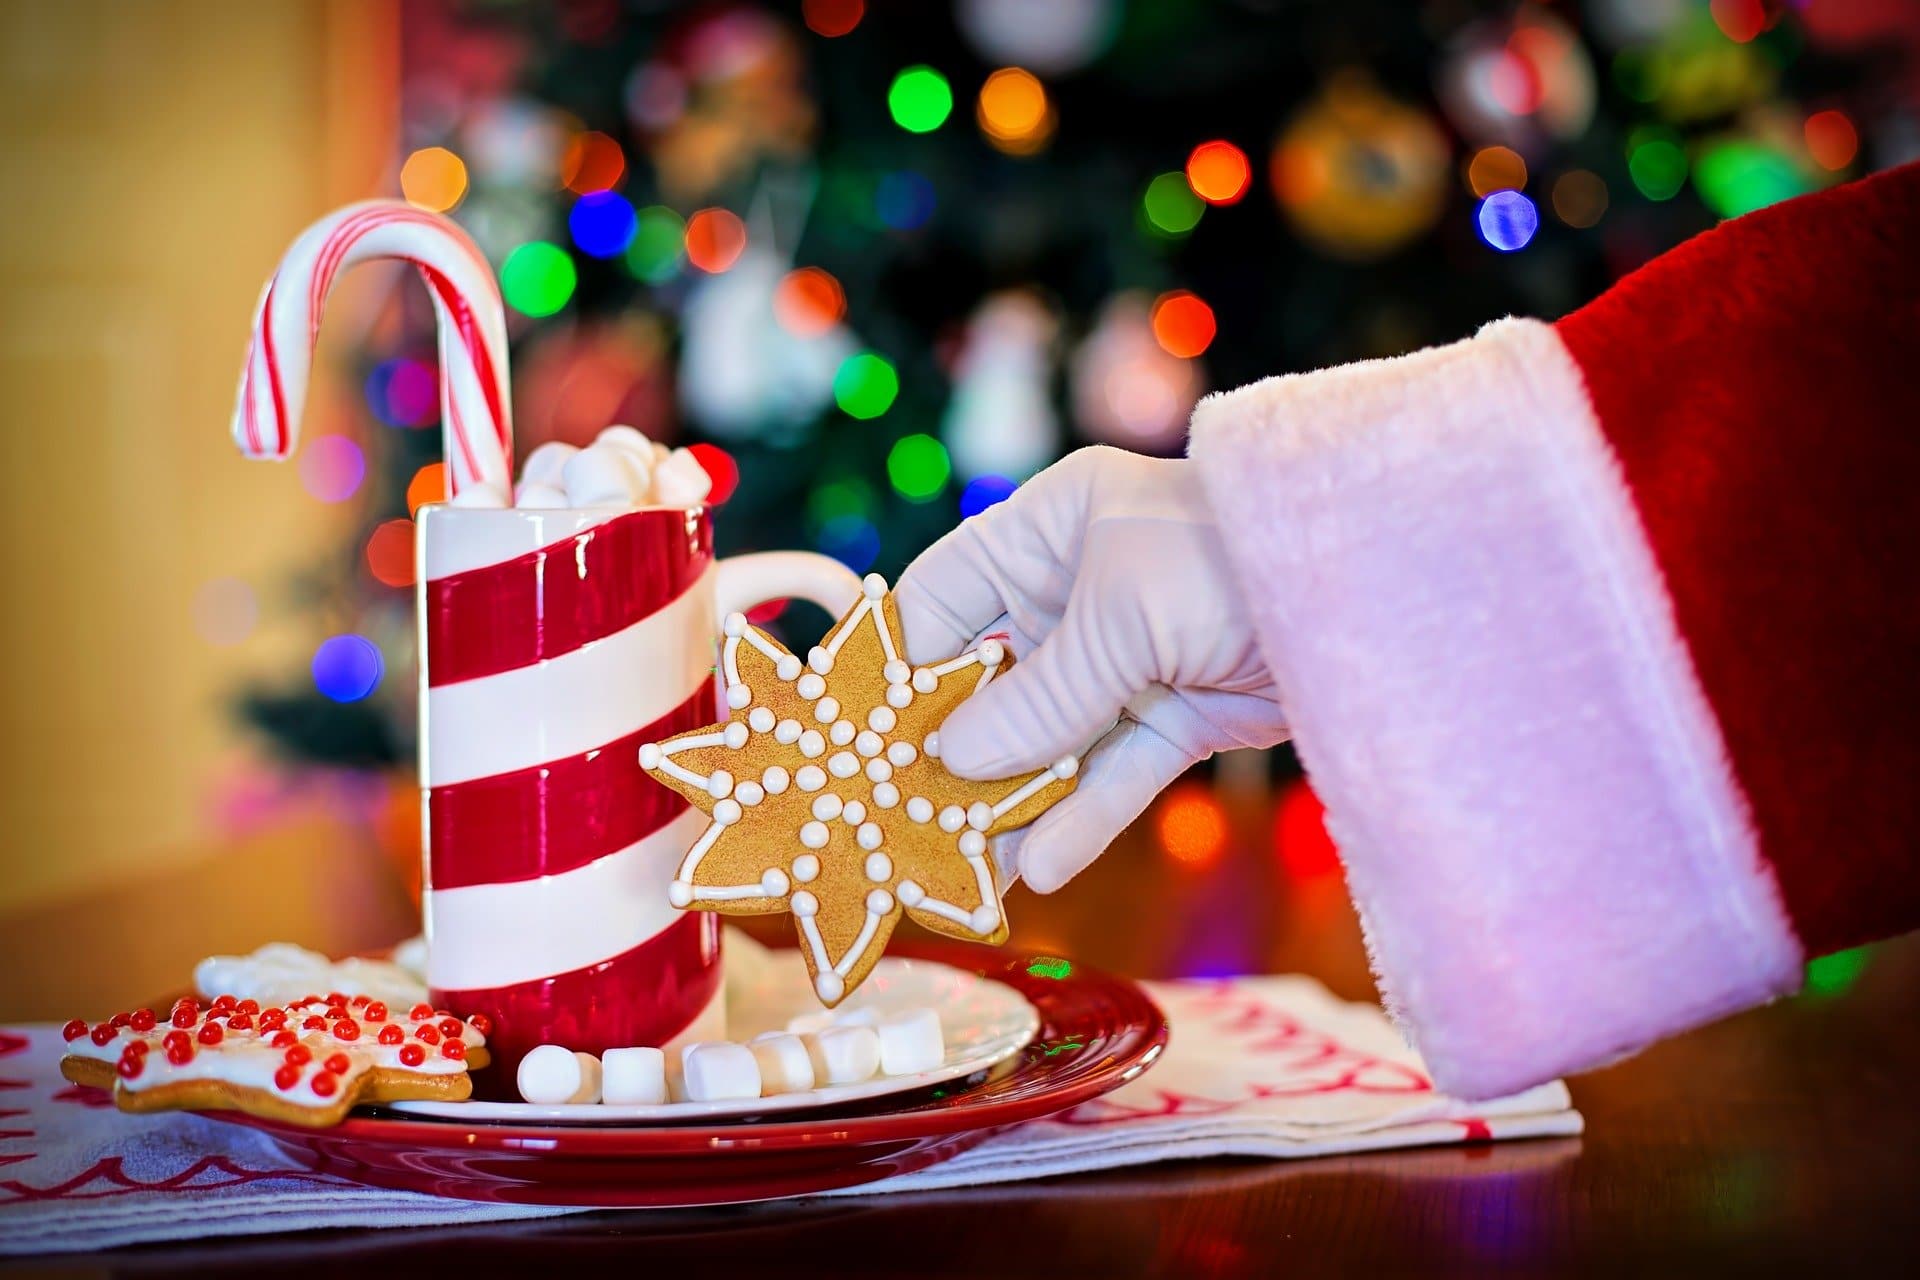 Santa's hand taking cookie from plate